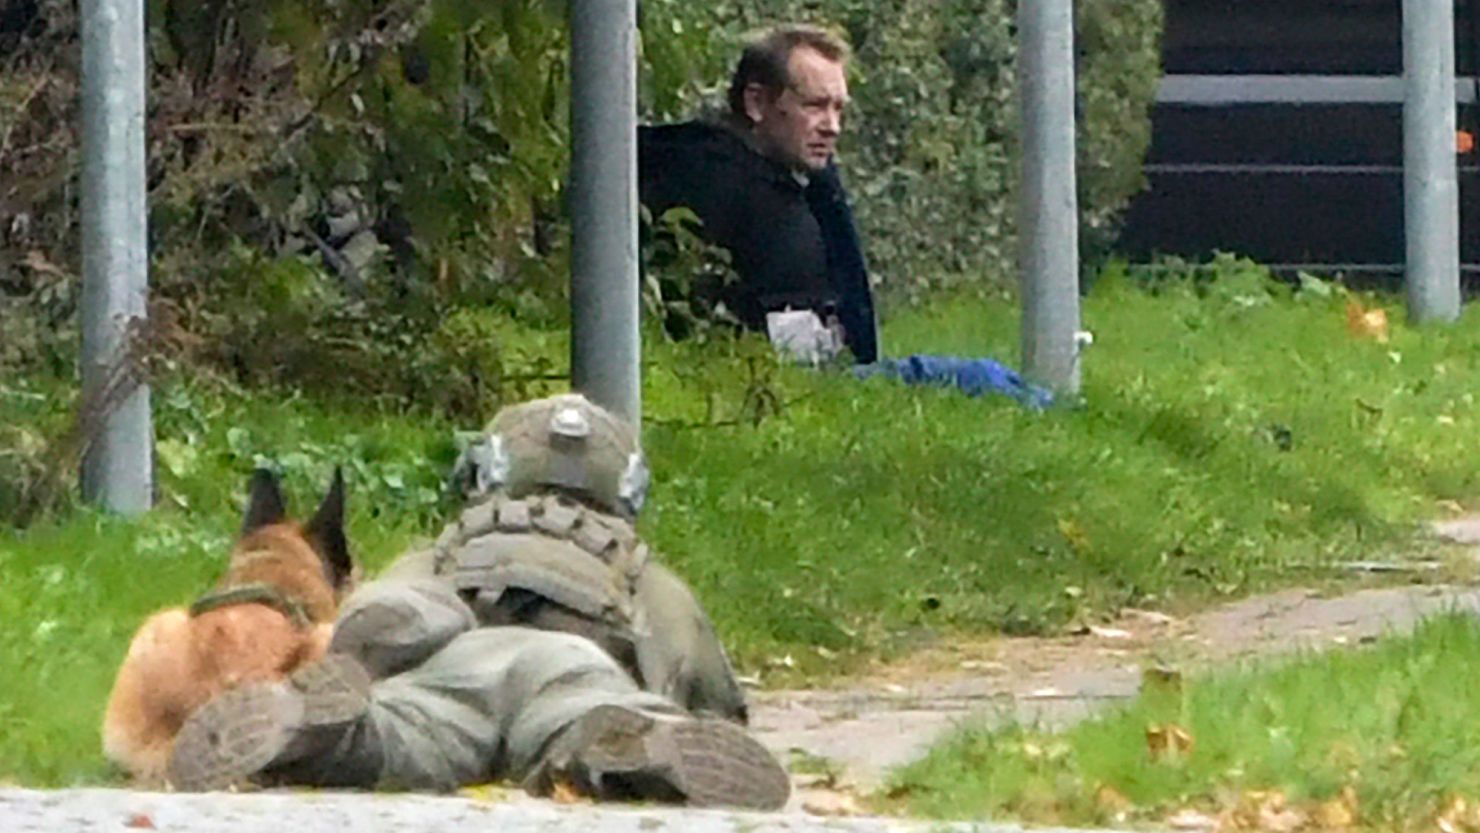 A police marksman and his dog observes Peter Madsen as he attempts to break out of prison in Albertslund, Denmark.